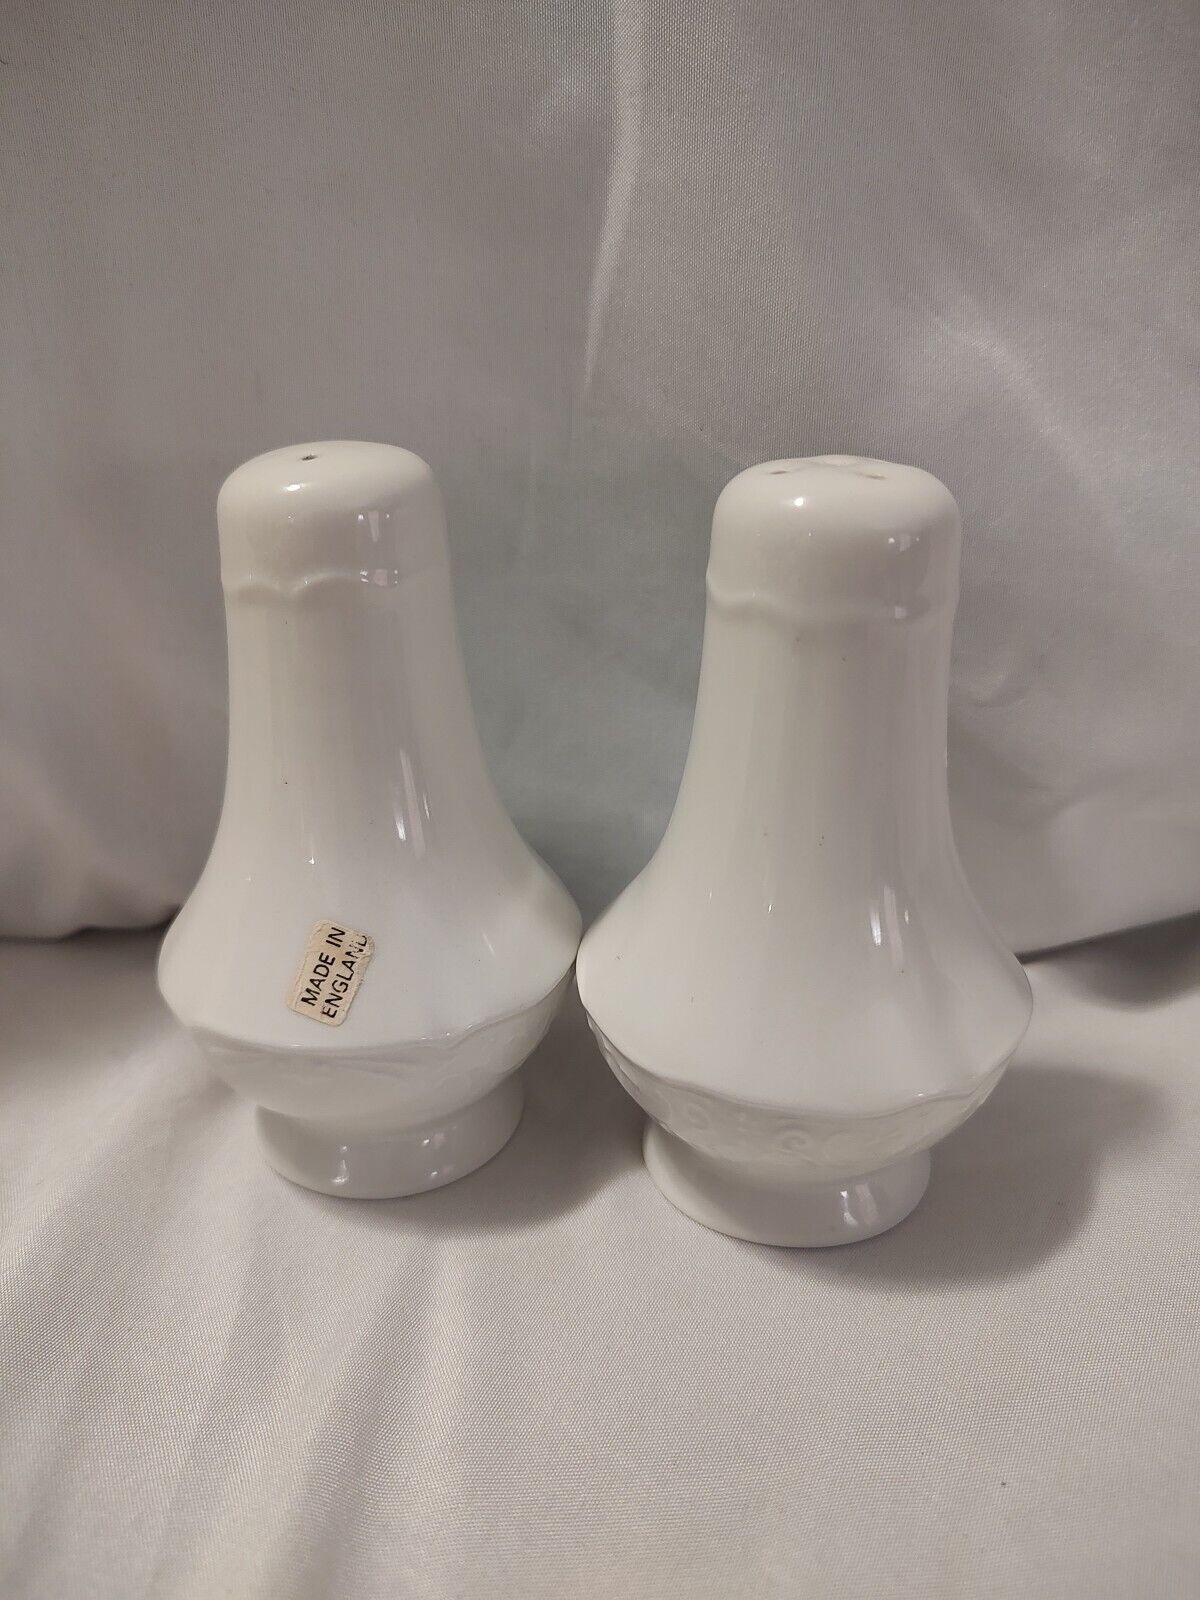 SALT and PEPPER SHAKERS, RICHMOND WHITE, JOHNSON BROTHERS VINTAGE, From ENGLAND